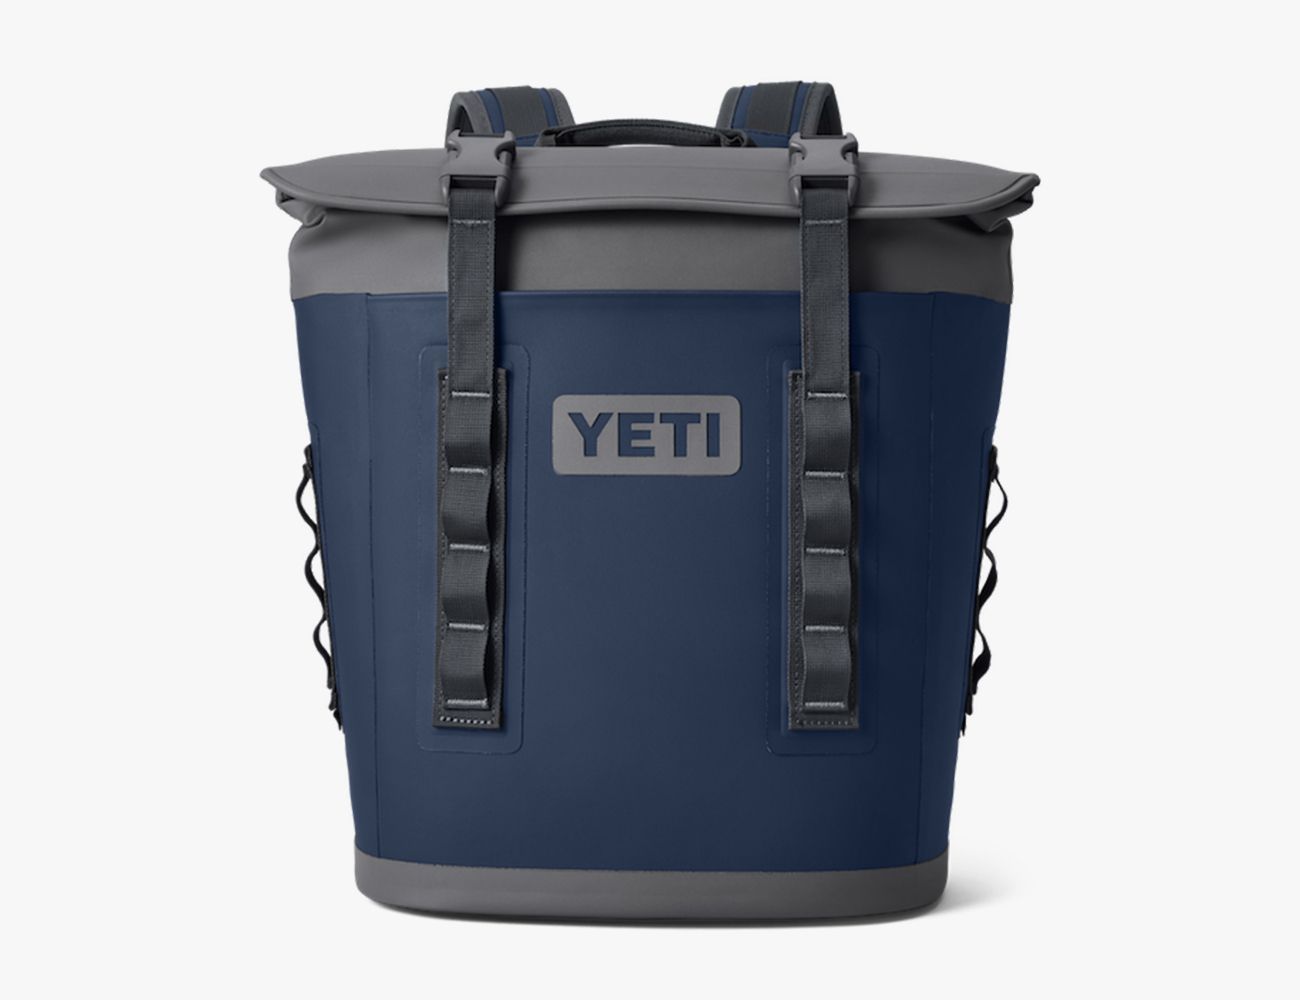 A Mini Yeti Cooler. What will come out next? #yeti #miniature #cooler